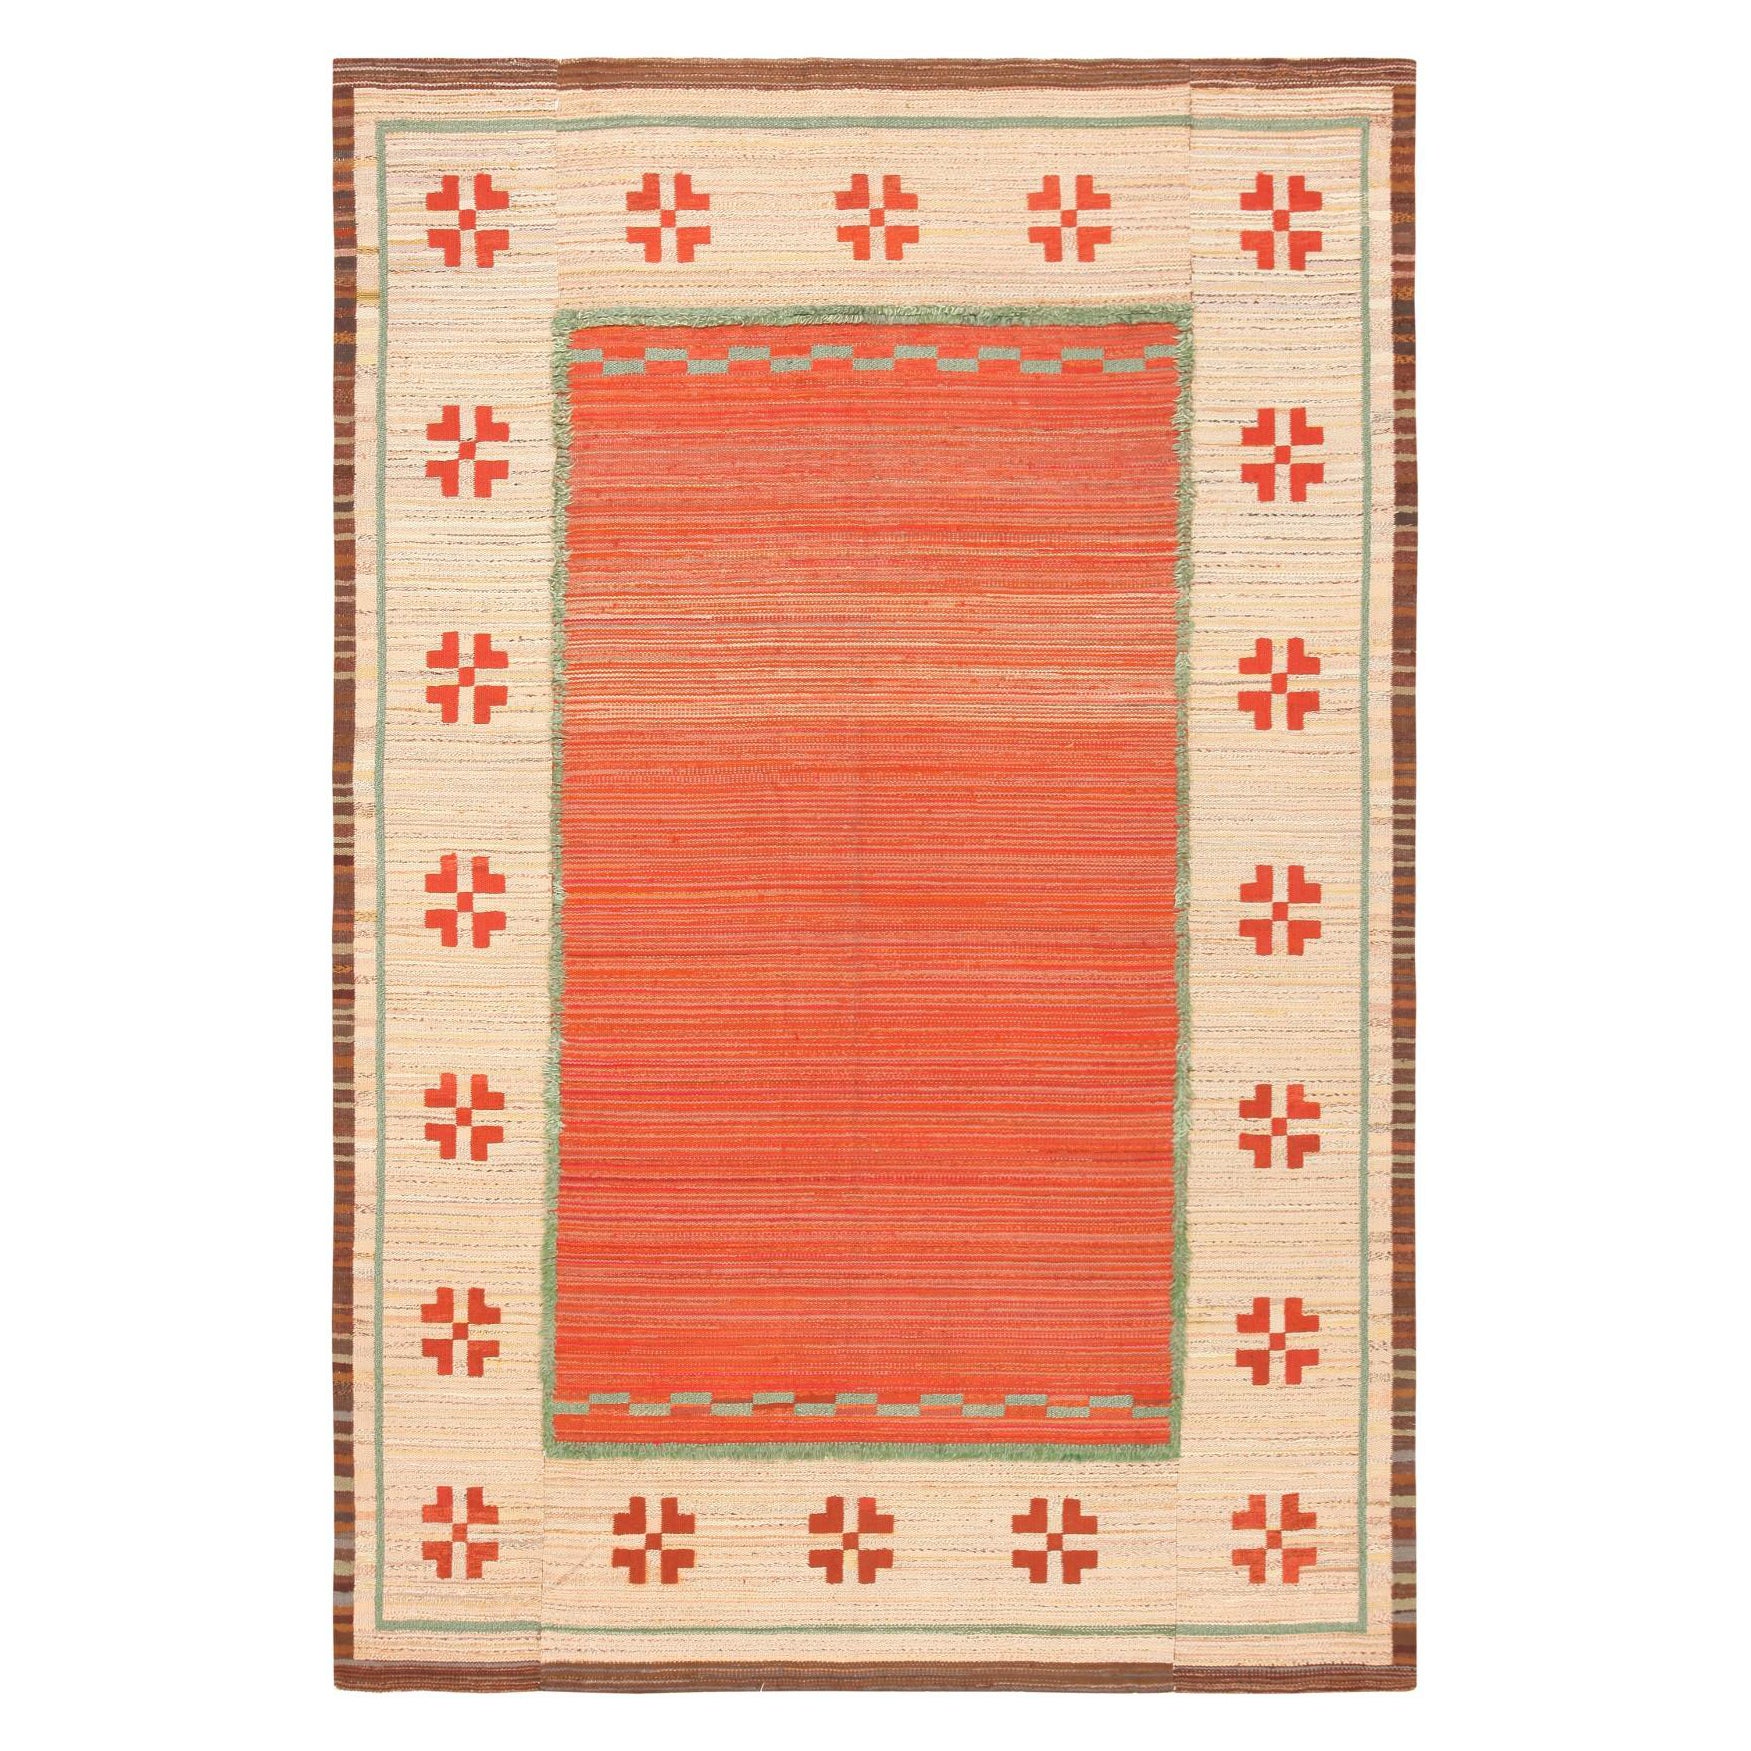 What is a flat weave rug?